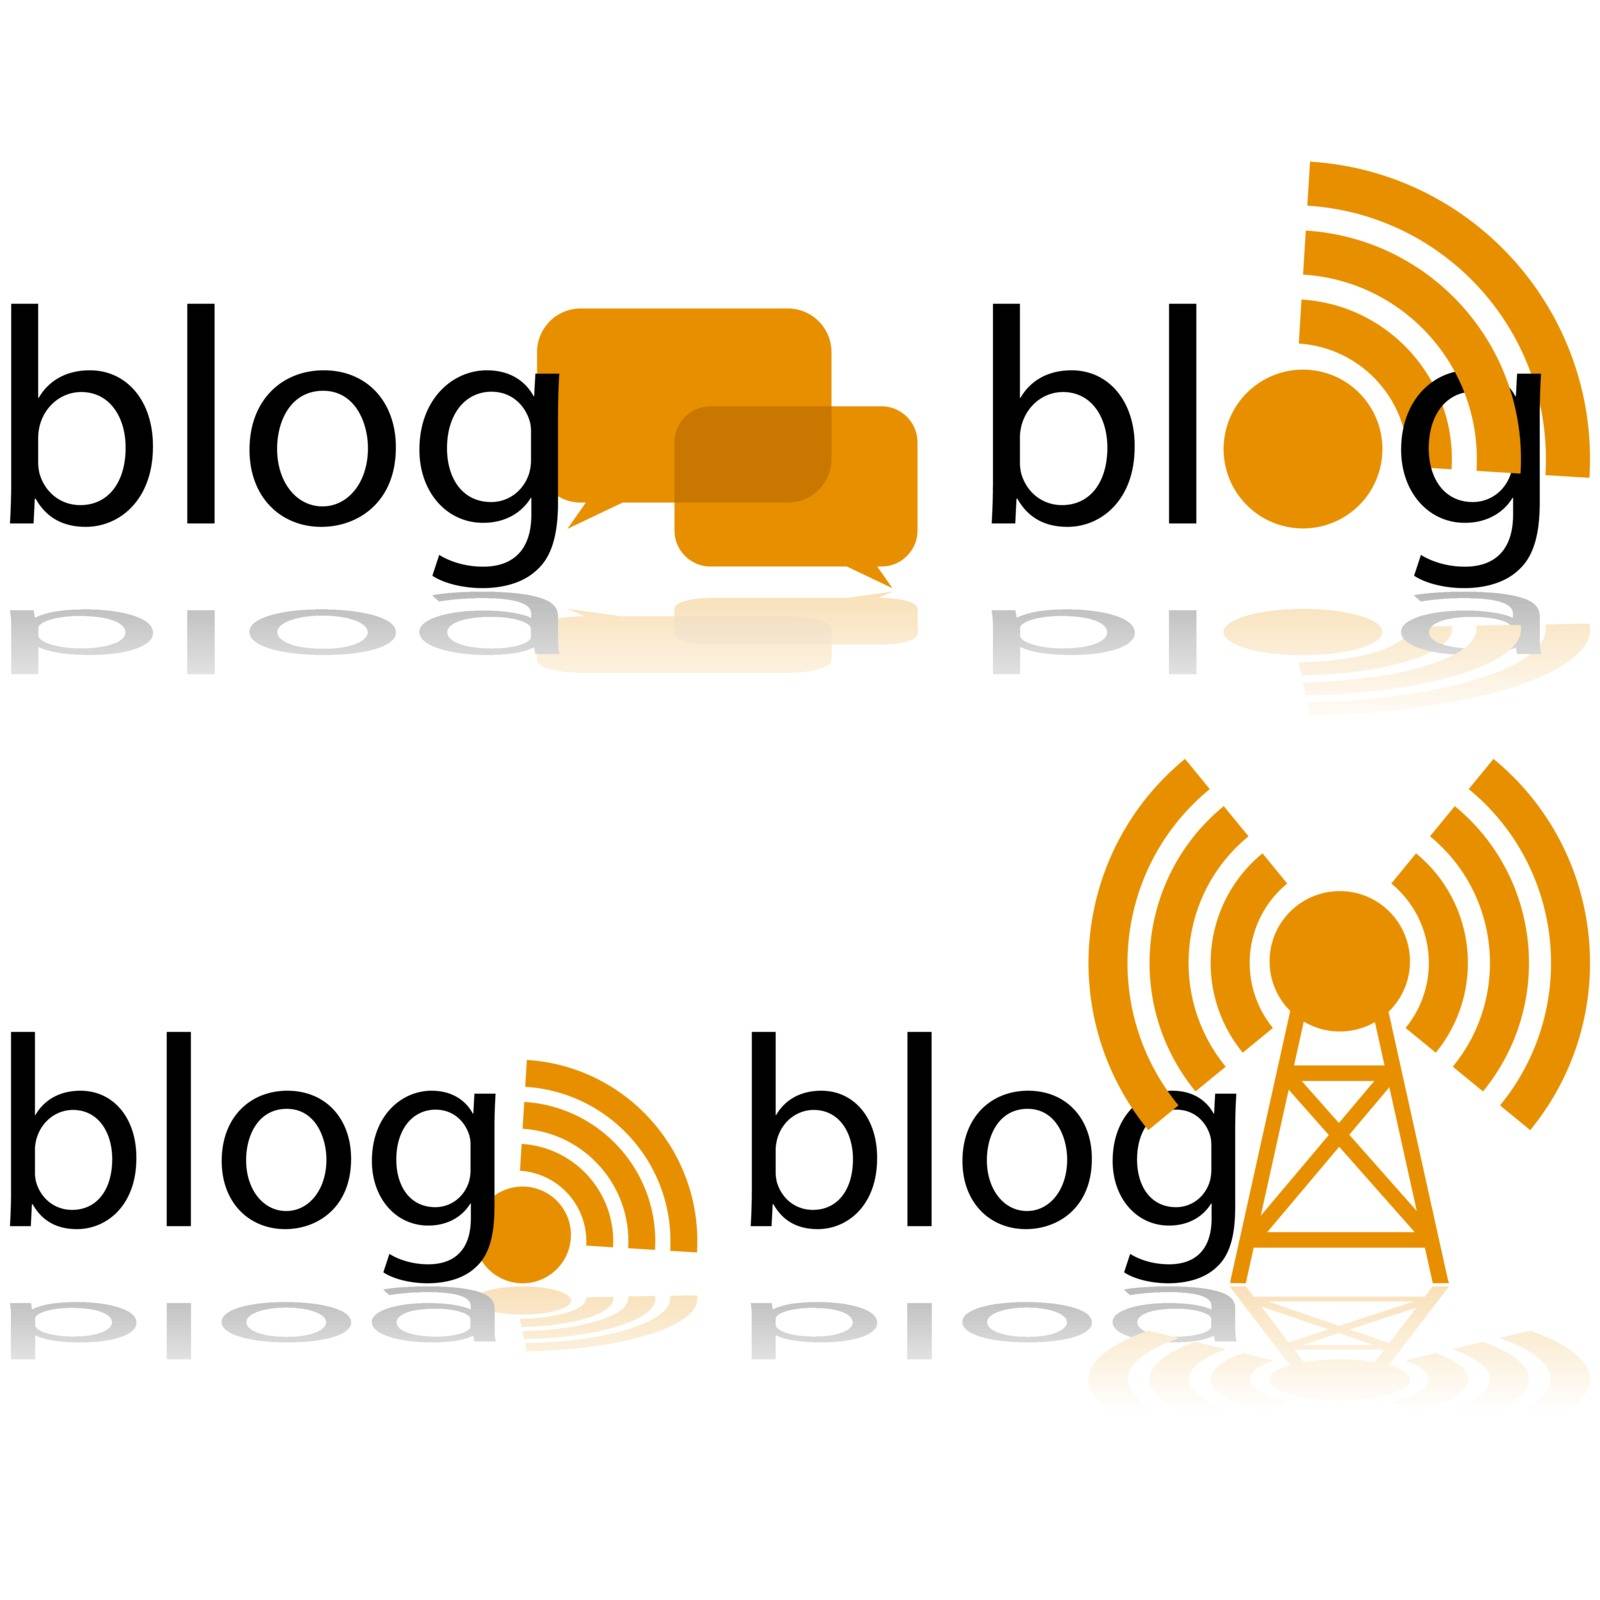 Icon set showing the word blog combined in different ways with smaller symbols for transmission or conversation